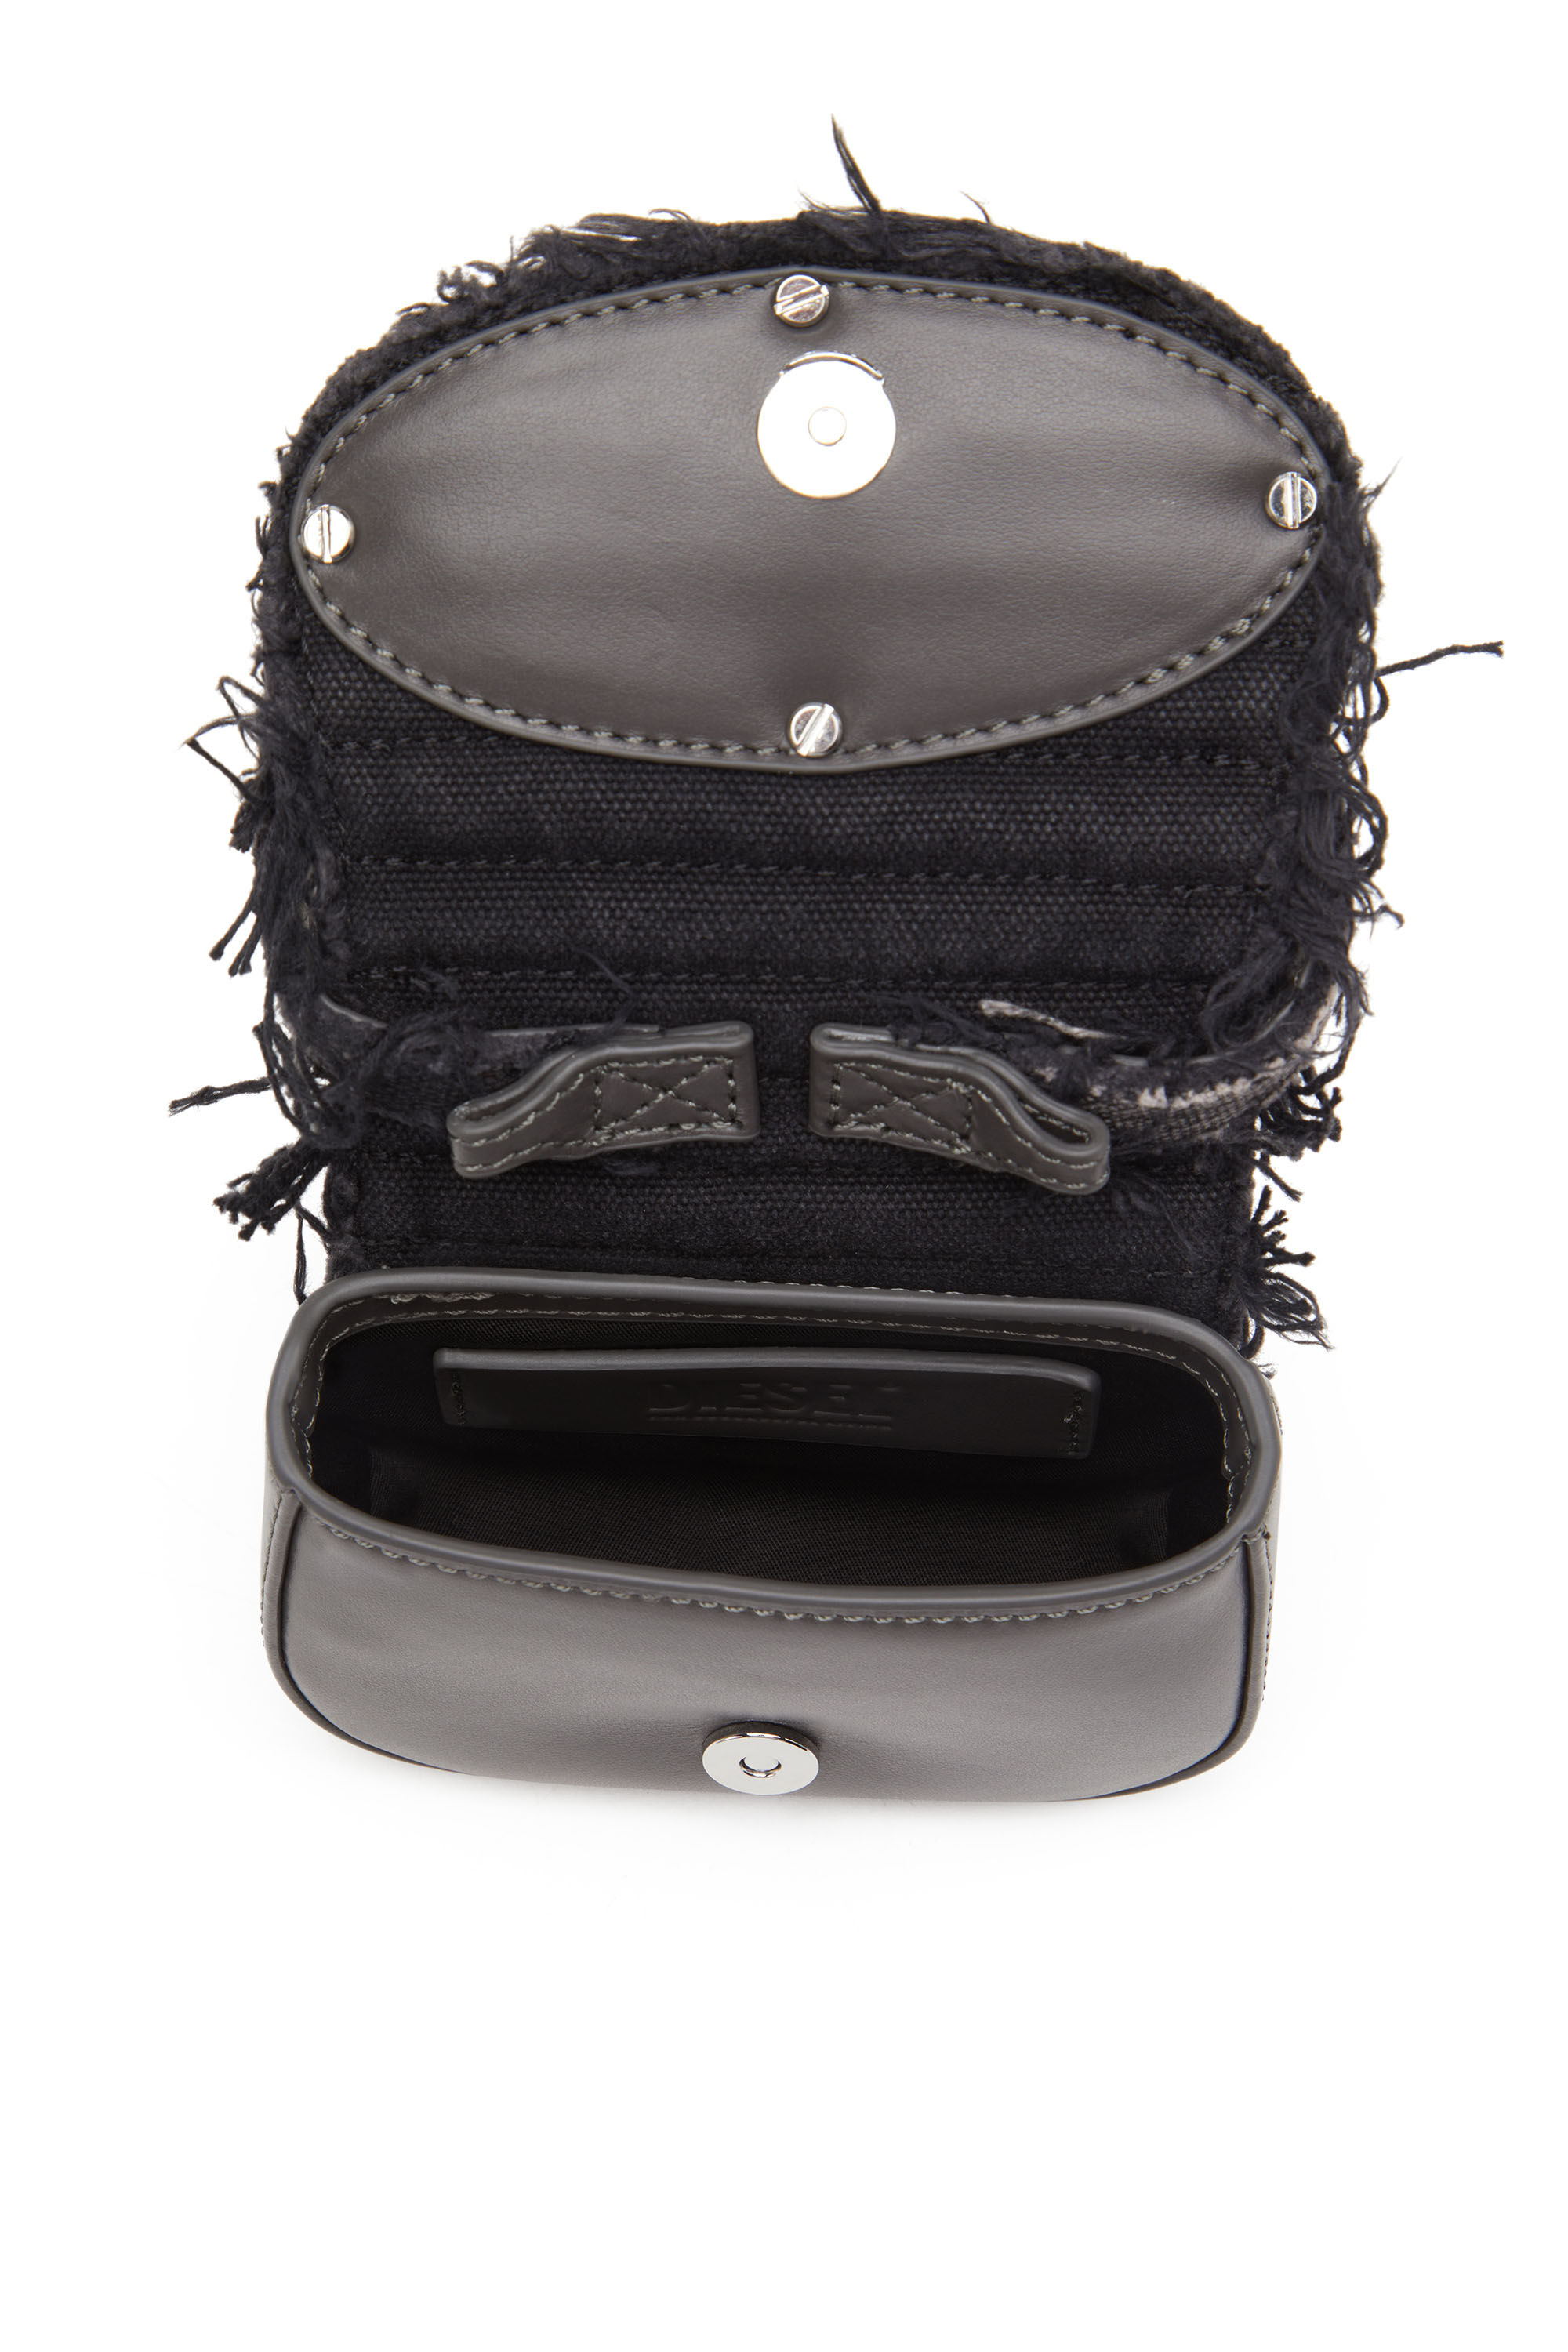 Diesel 1DR XS Mini Bag with D Plaque Black in Nappa Leather with